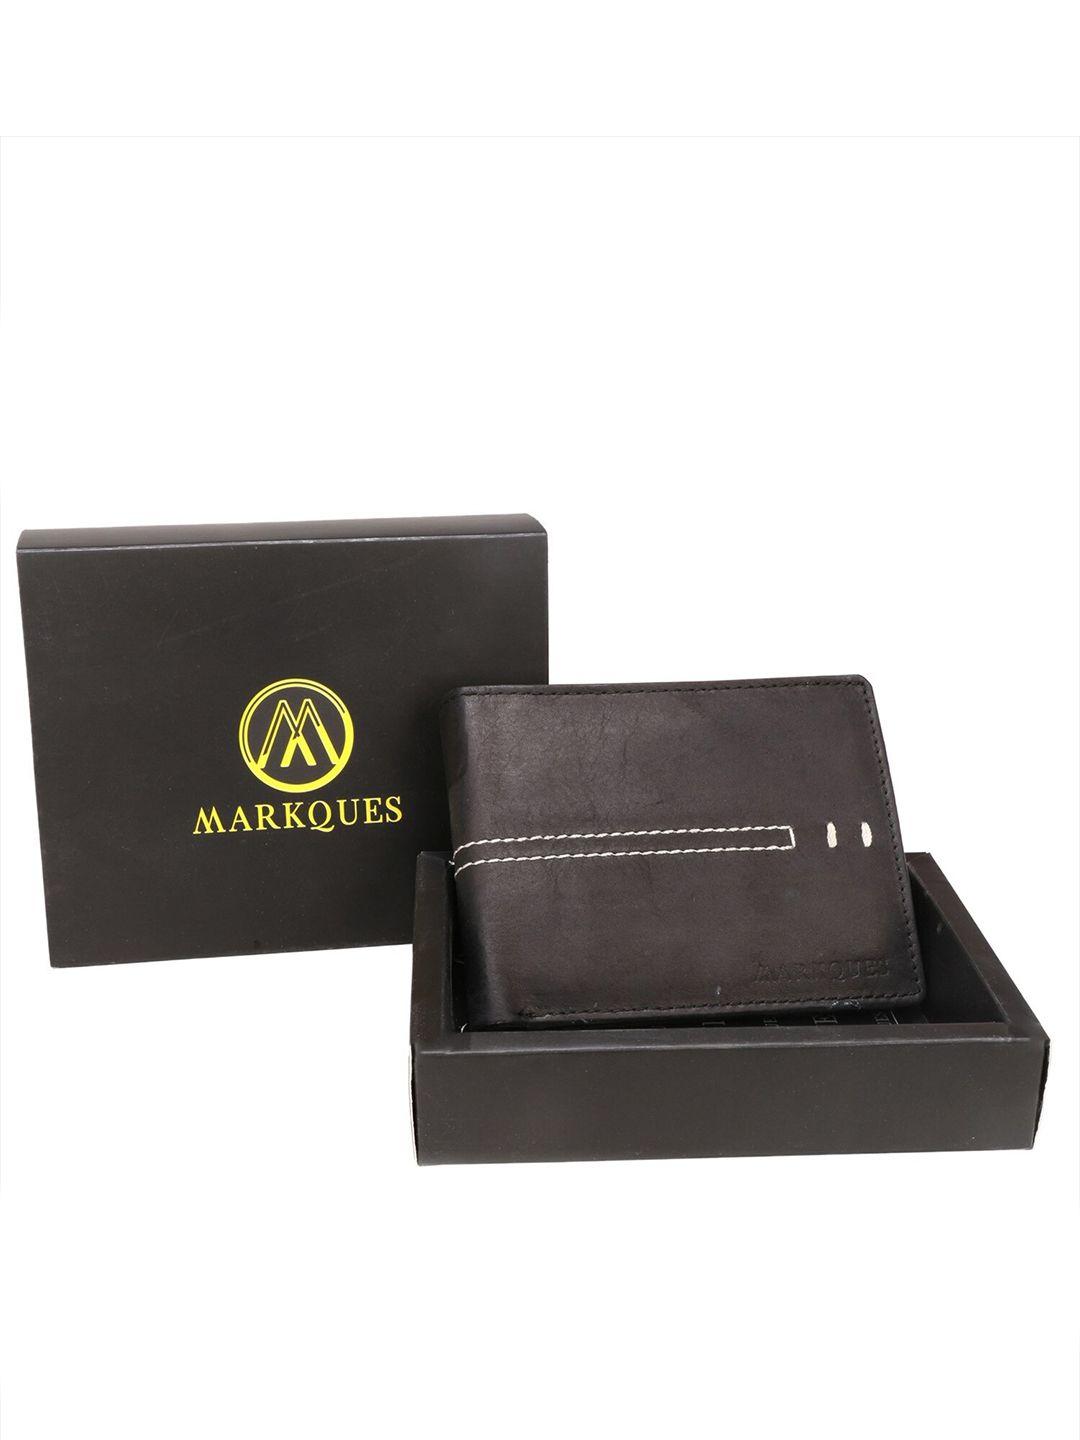 markques men black leather two fold wallet